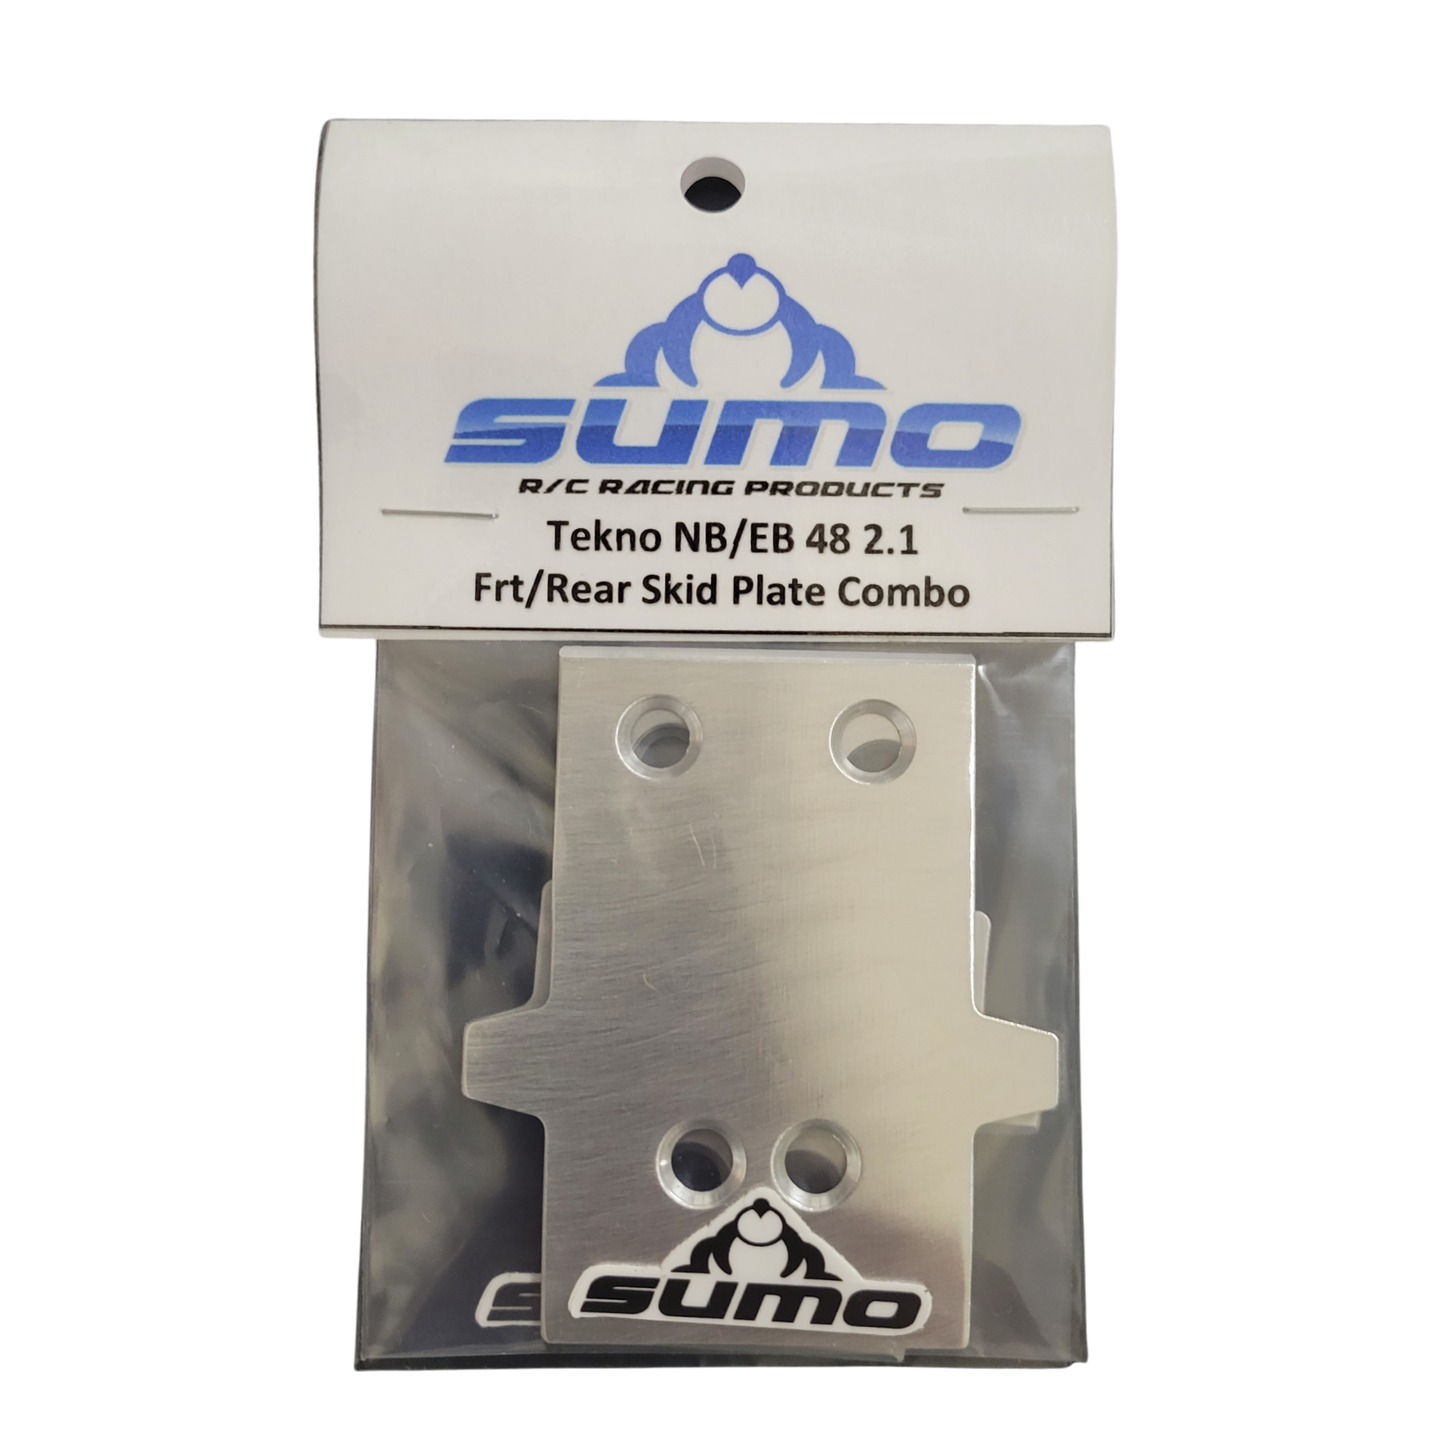 Sumo Racing Skid Plates for "New" Tekno NB/EB48 2.1 Buggy